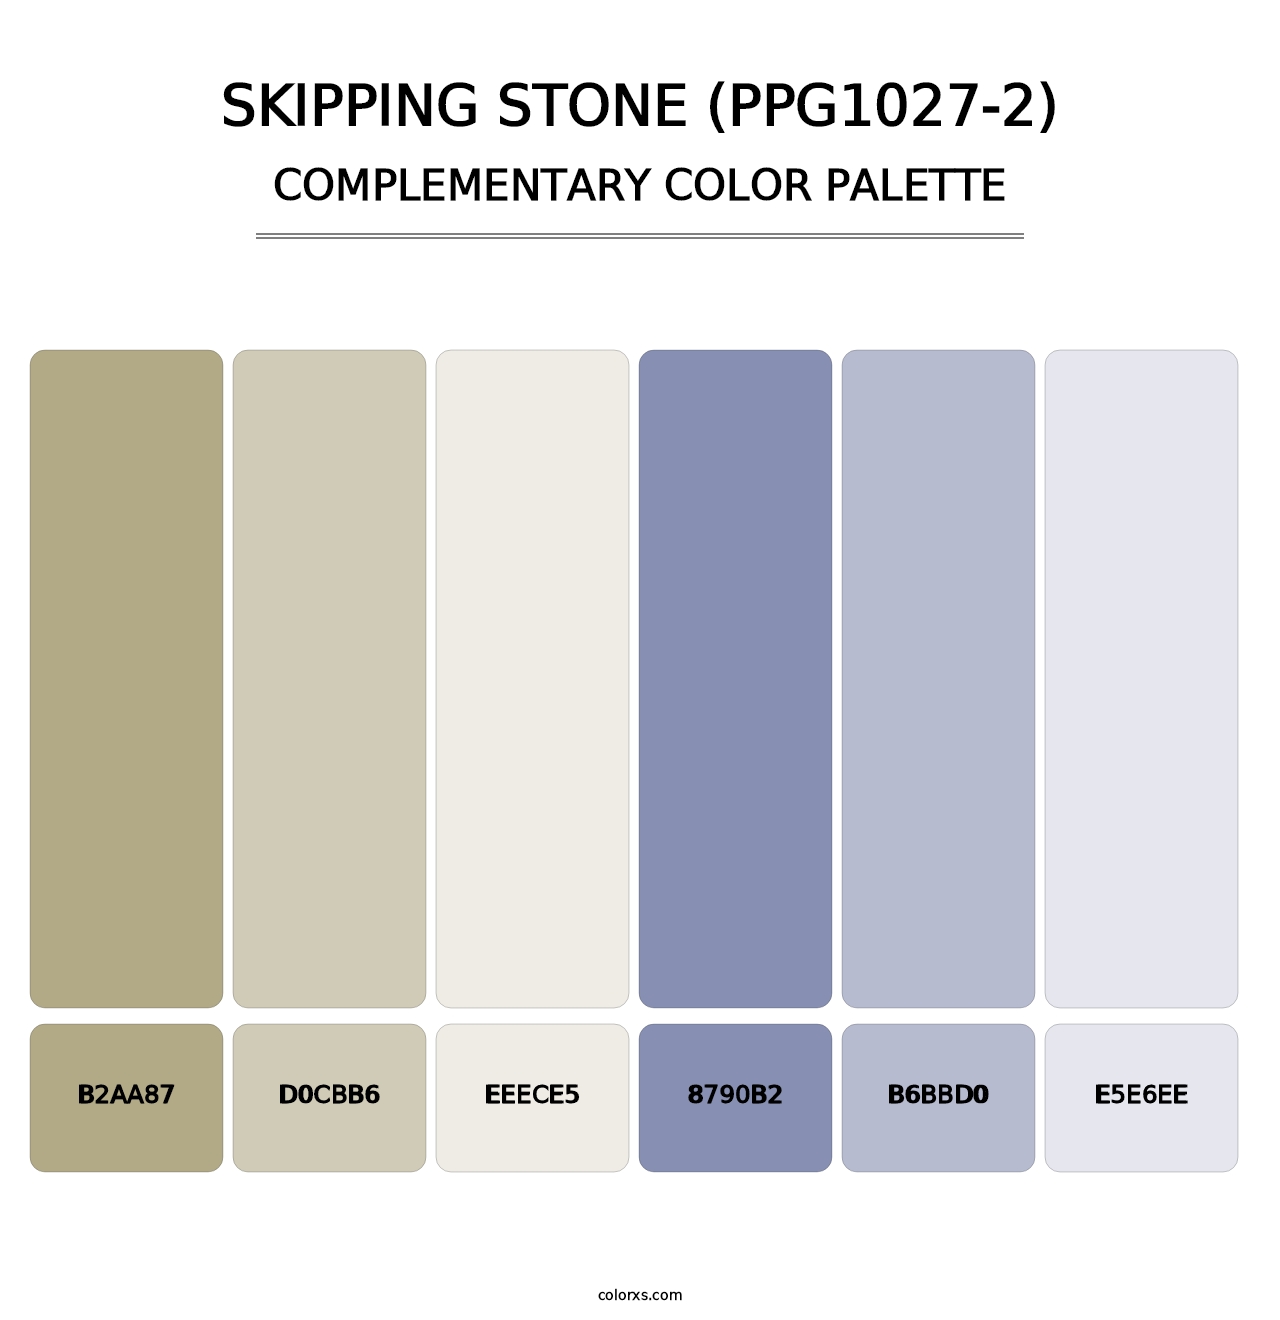 Skipping Stone (PPG1027-2) - Complementary Color Palette